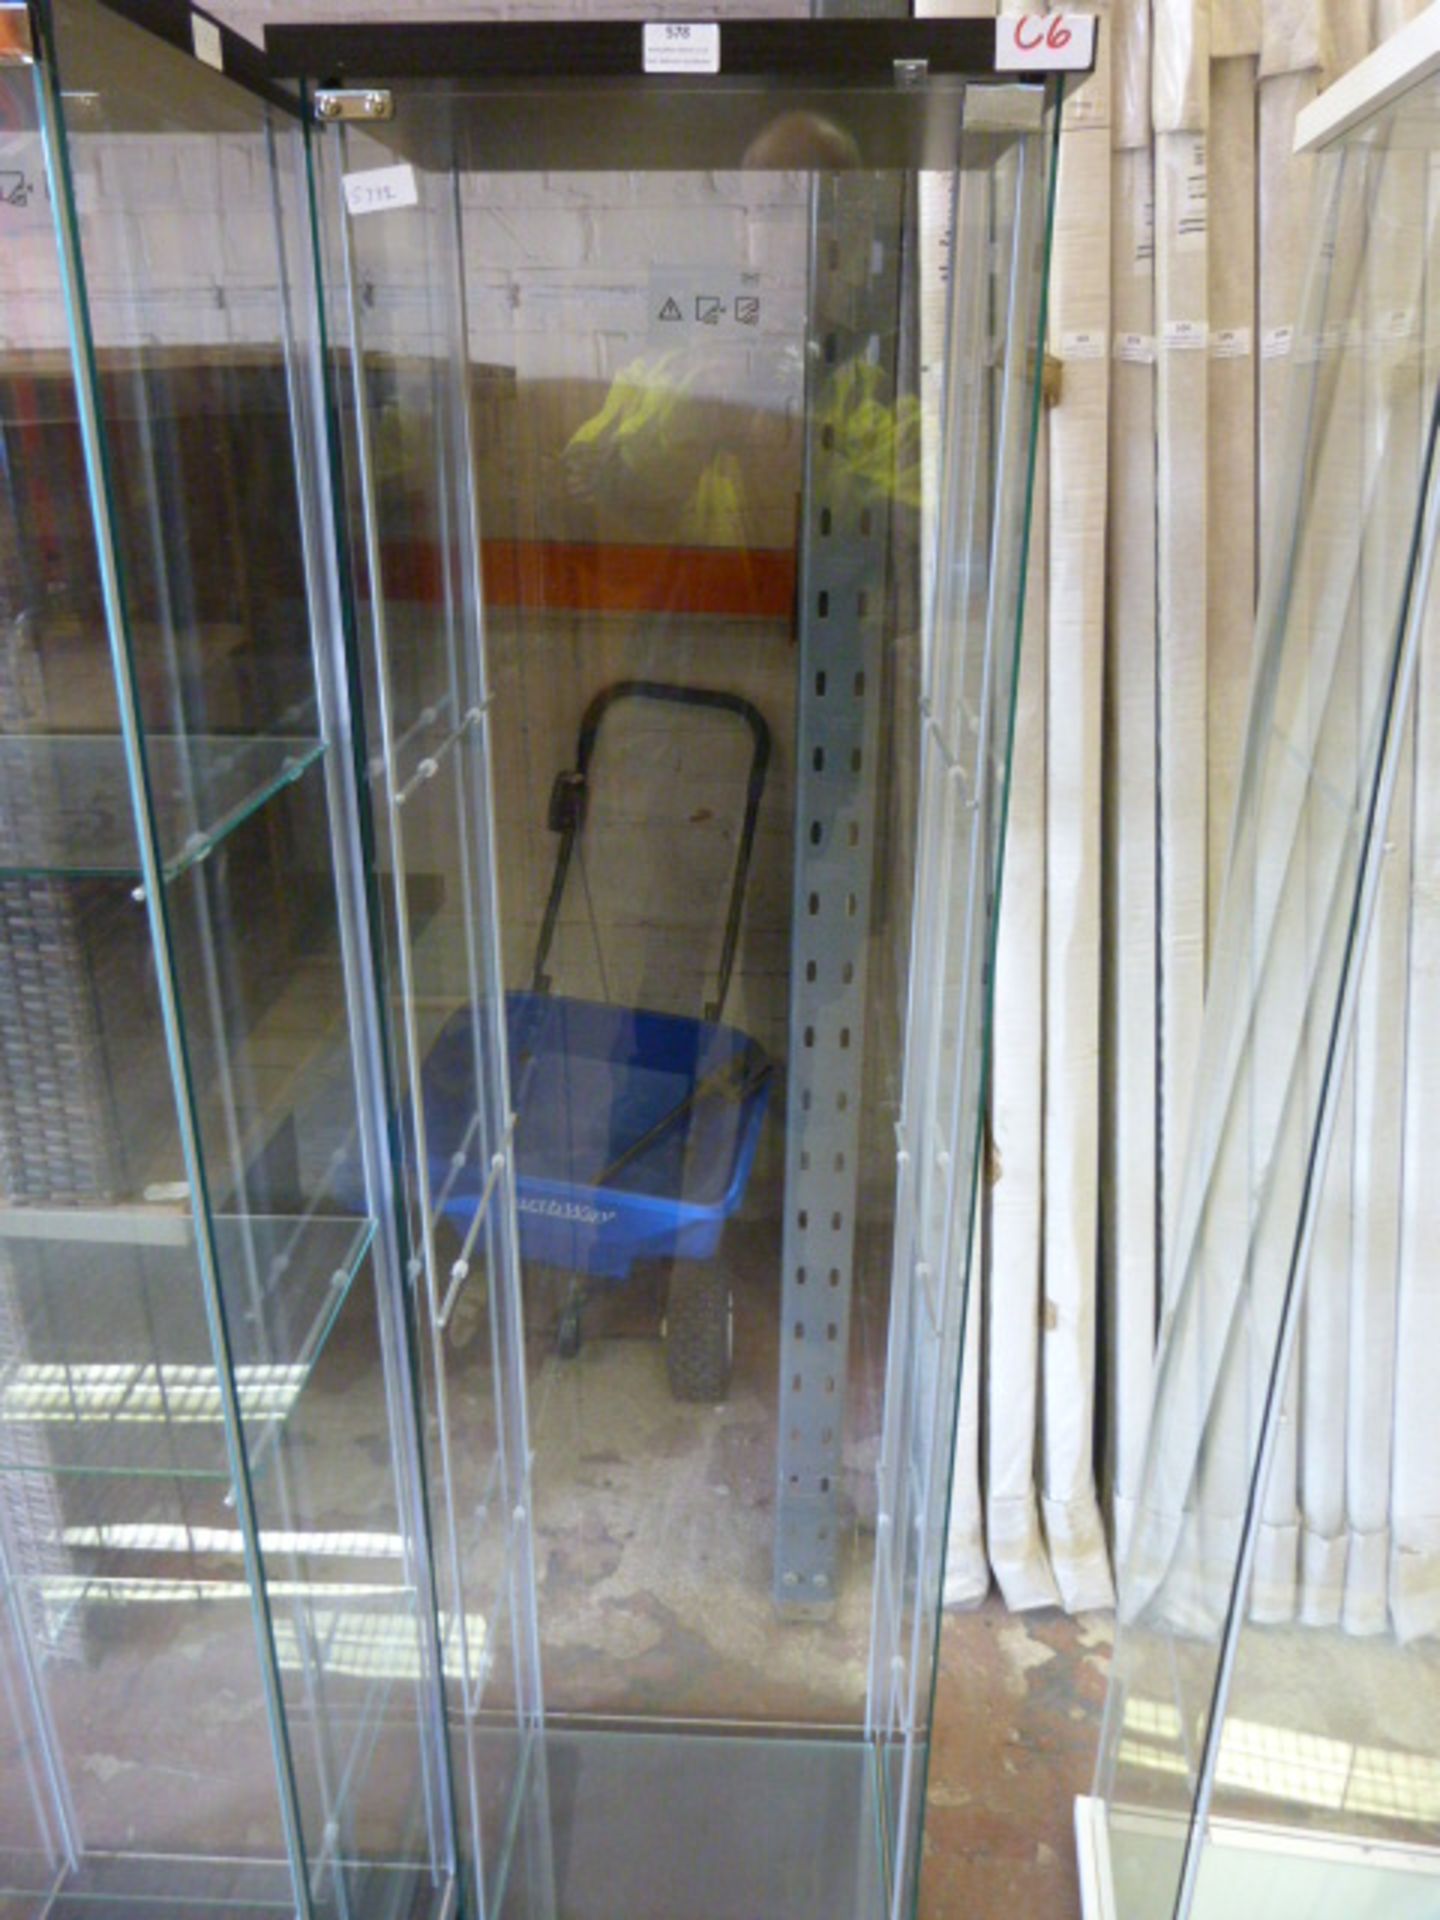 *Glass Display Cabinet with Three Shelves